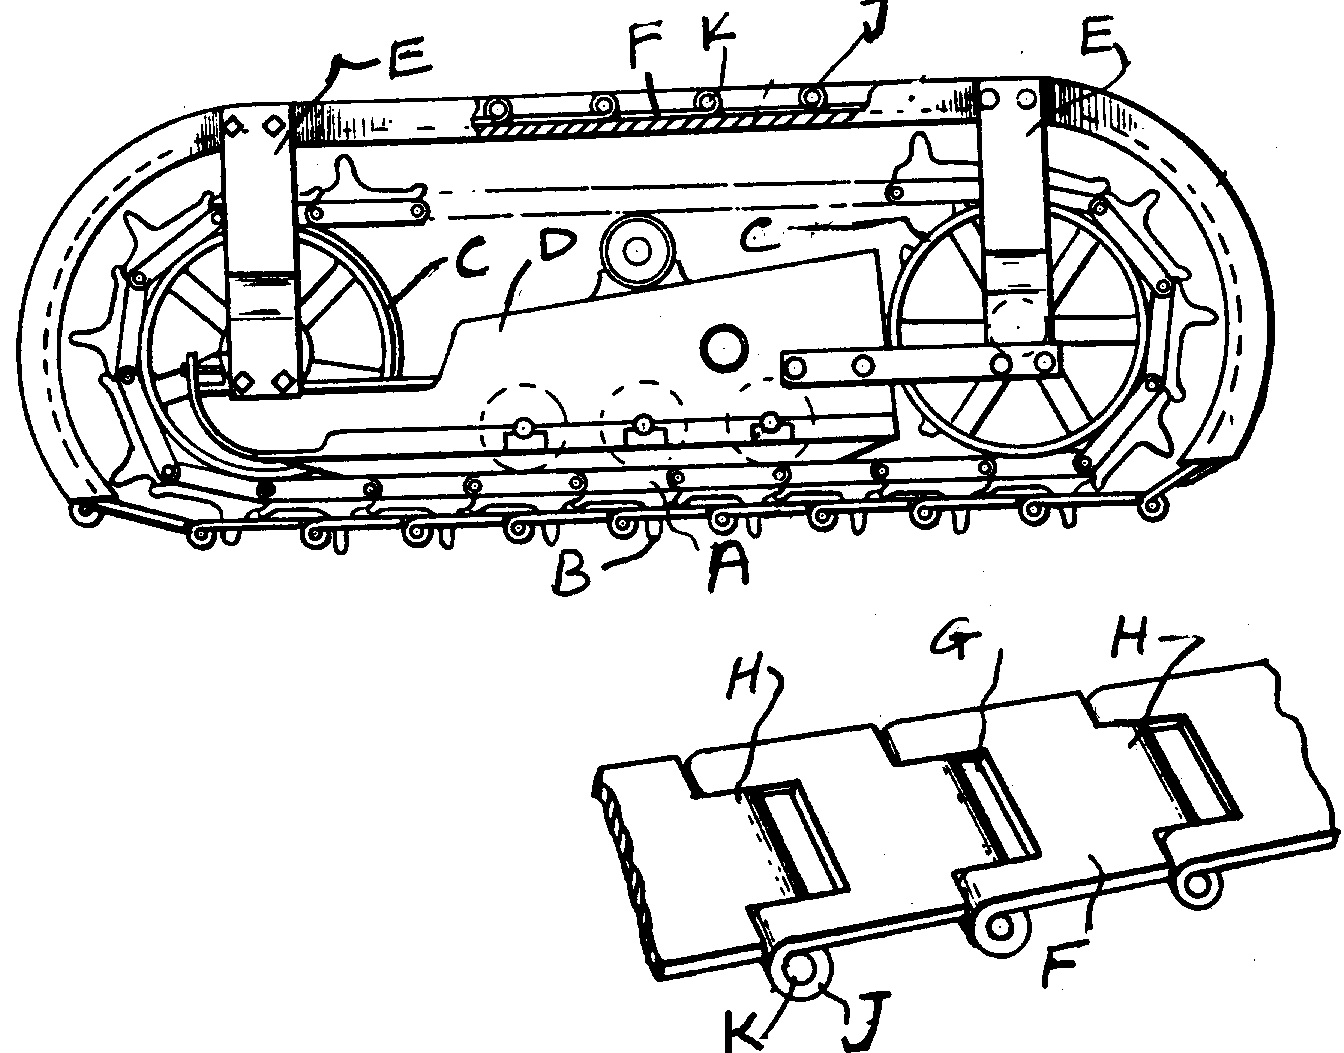 Cleaner or cleaning chain F traverse with track to clean trackA. A - Endless chain or link track;B - Track shoe; C - Sprocketwheel ;D - Support frame; E - Support; F - Cleaning or cleaninglink; G - Notch; H - Tongue; J - Loop; K - Pivot
